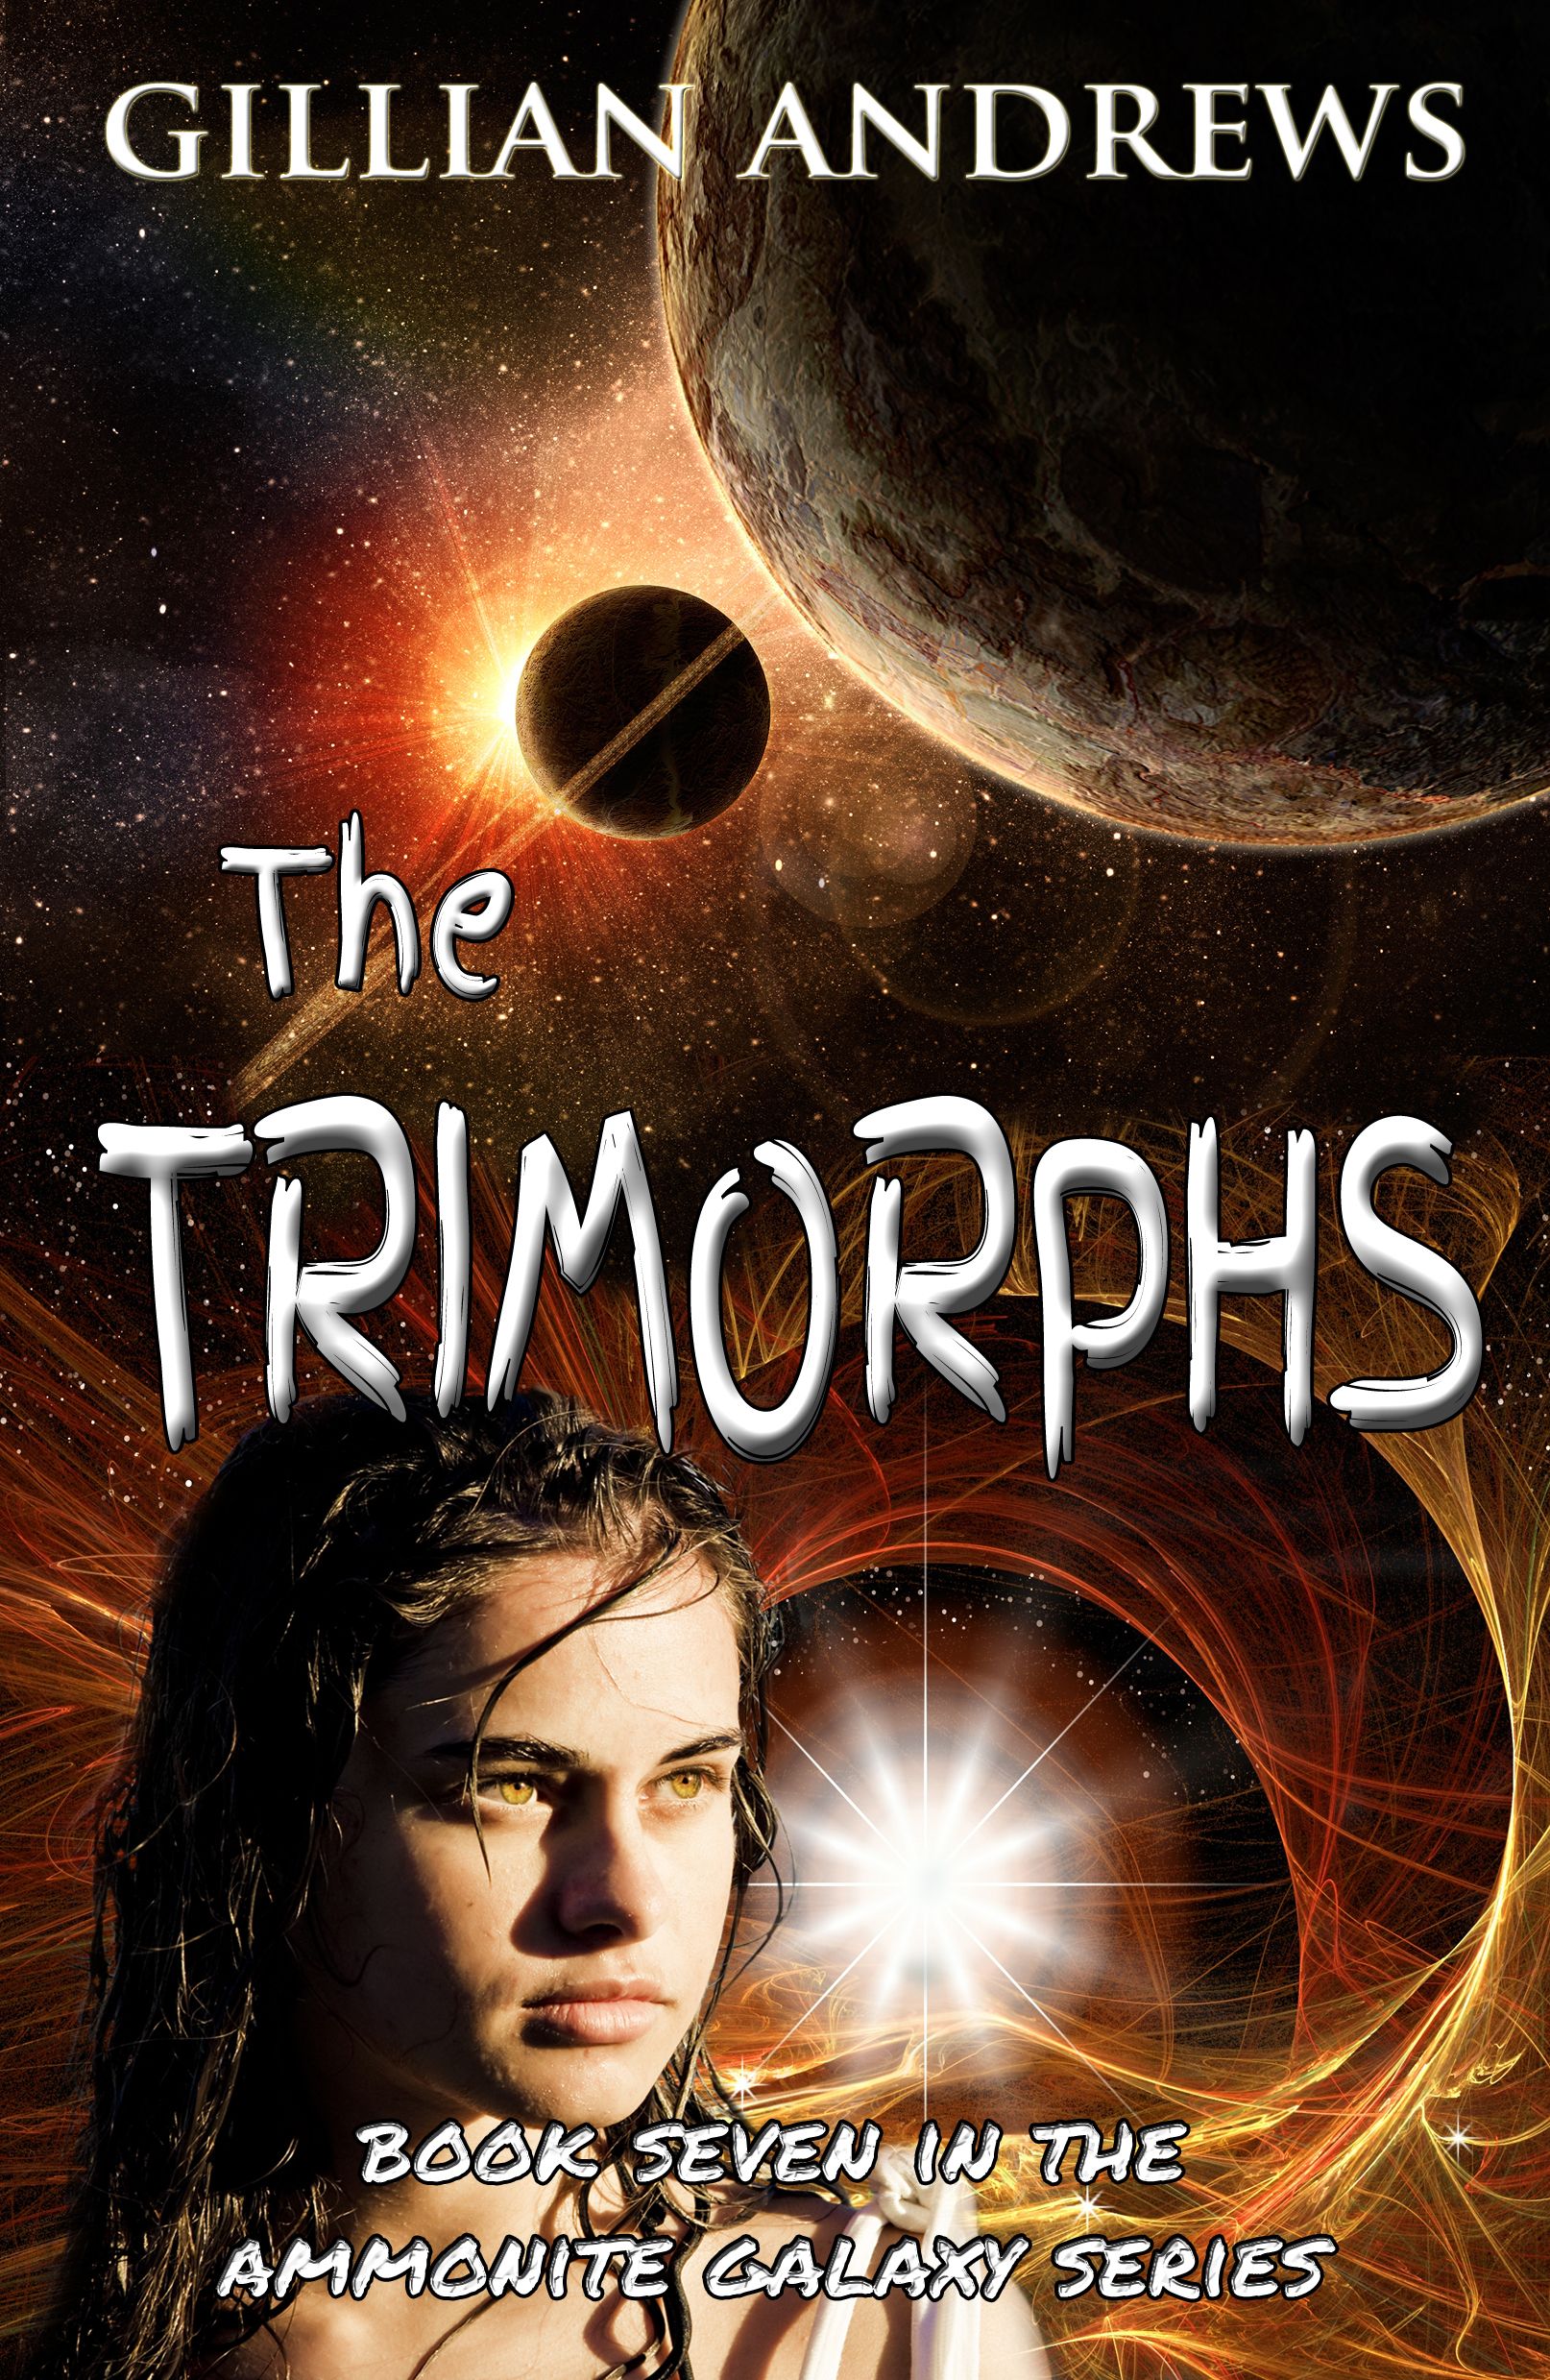 Full cover of the Trimorphs, Seventh and Last book in the Ammonite Galaxy series, featuring Raven, Temar and Ashuaia